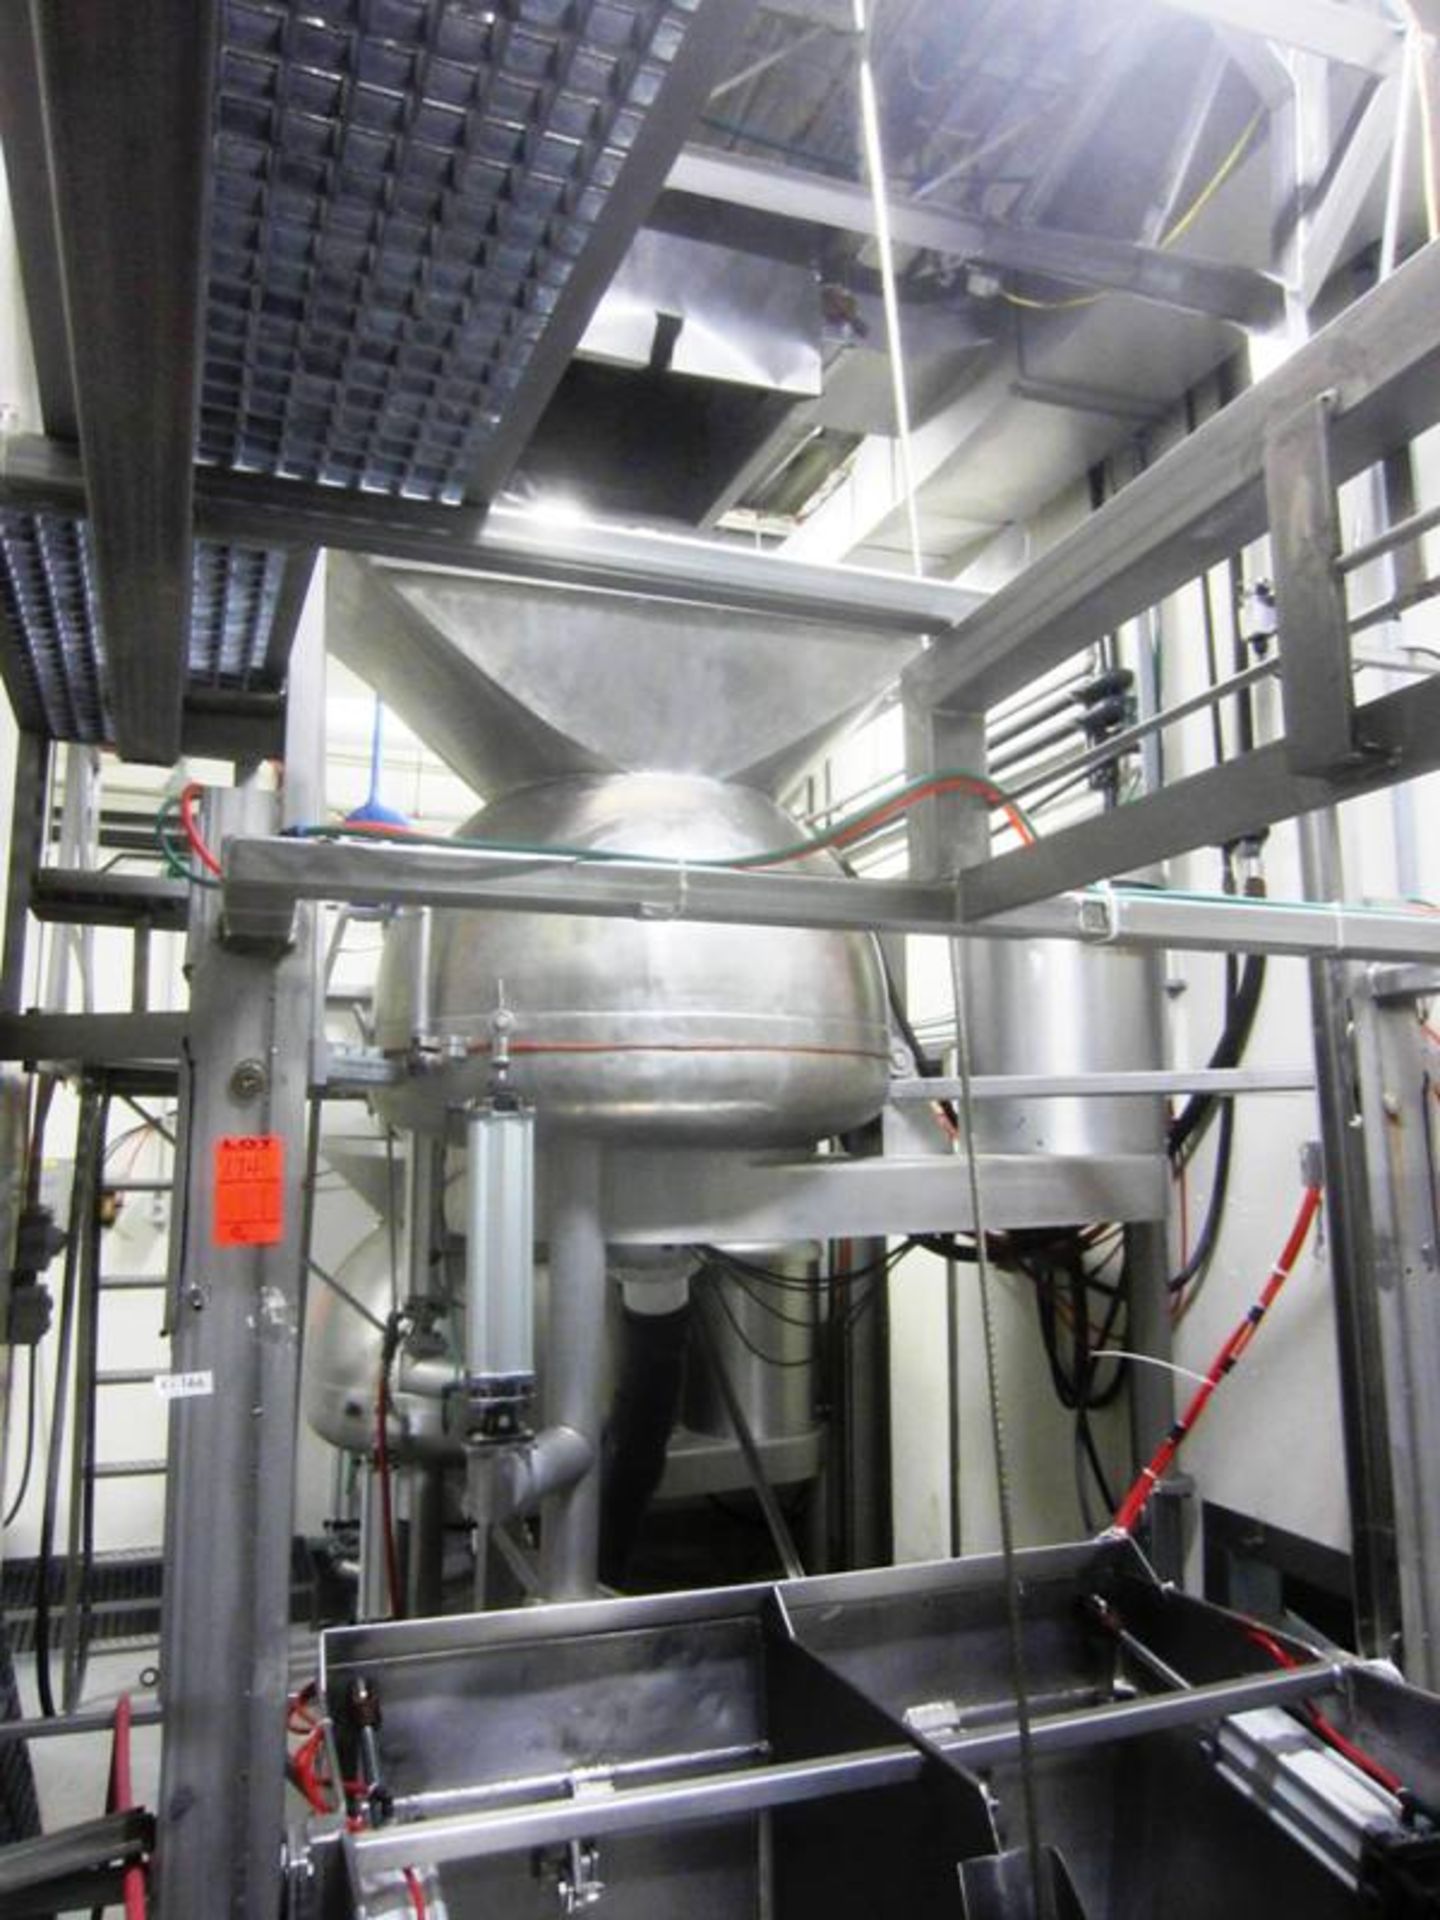 TecFood Mdl. V20 S.S. Stomach Washer with s.s. loader 3' W X 5' L, complete with rail, overhead work - Image 3 of 8